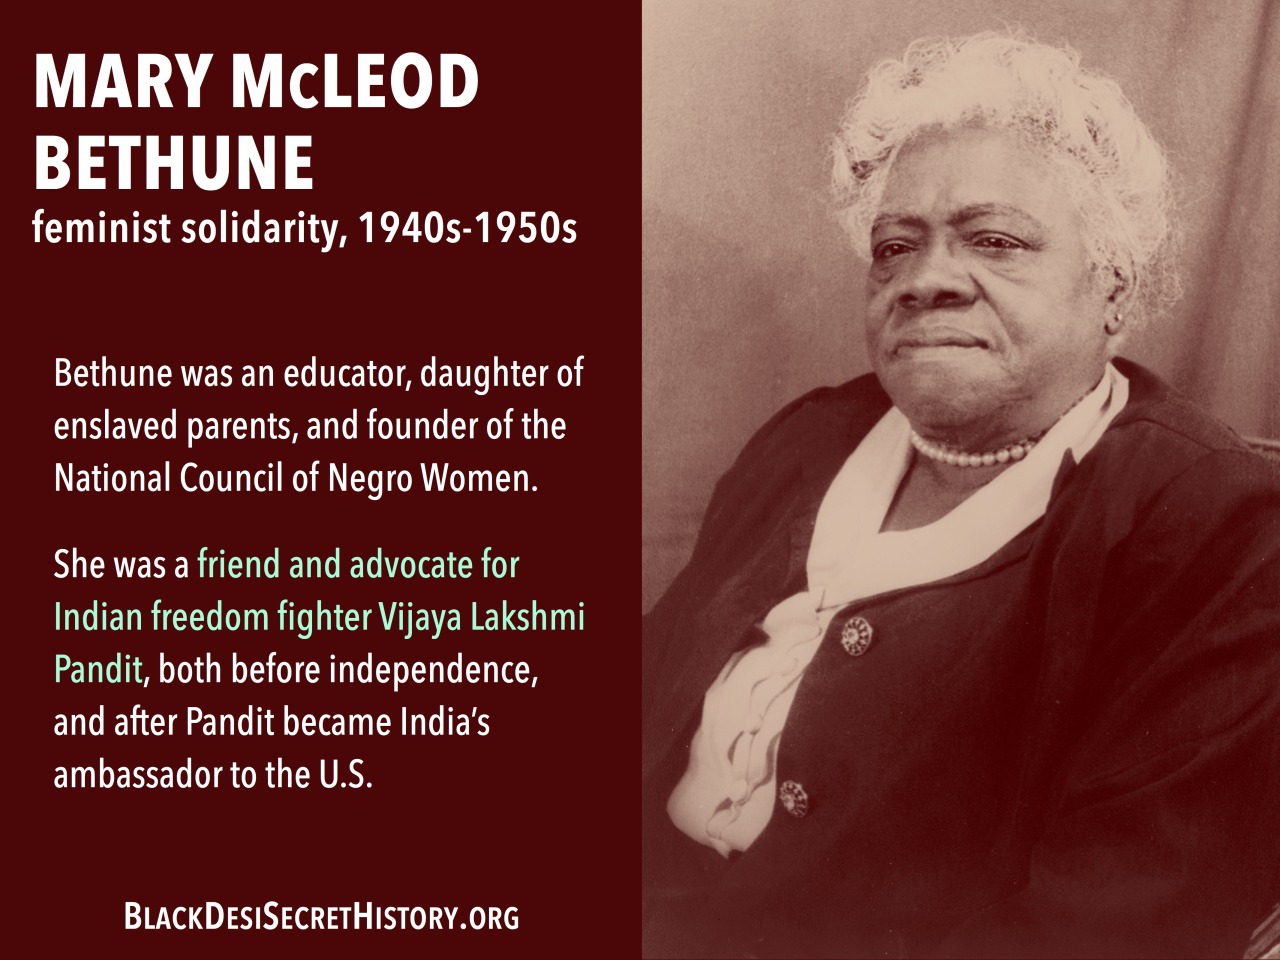 MARY McLEOD BETHUNE, feminist solidarity, 1940s-1950s: Bethune was an educator, daughter of enslaved parents, and founder of the National Council of Negro Women. She was a friend and advocate for Indian freedom fighter Vijaya Lakshmi Pandit, both before independence, and after Pandit became India’s ambassador to the U.S.